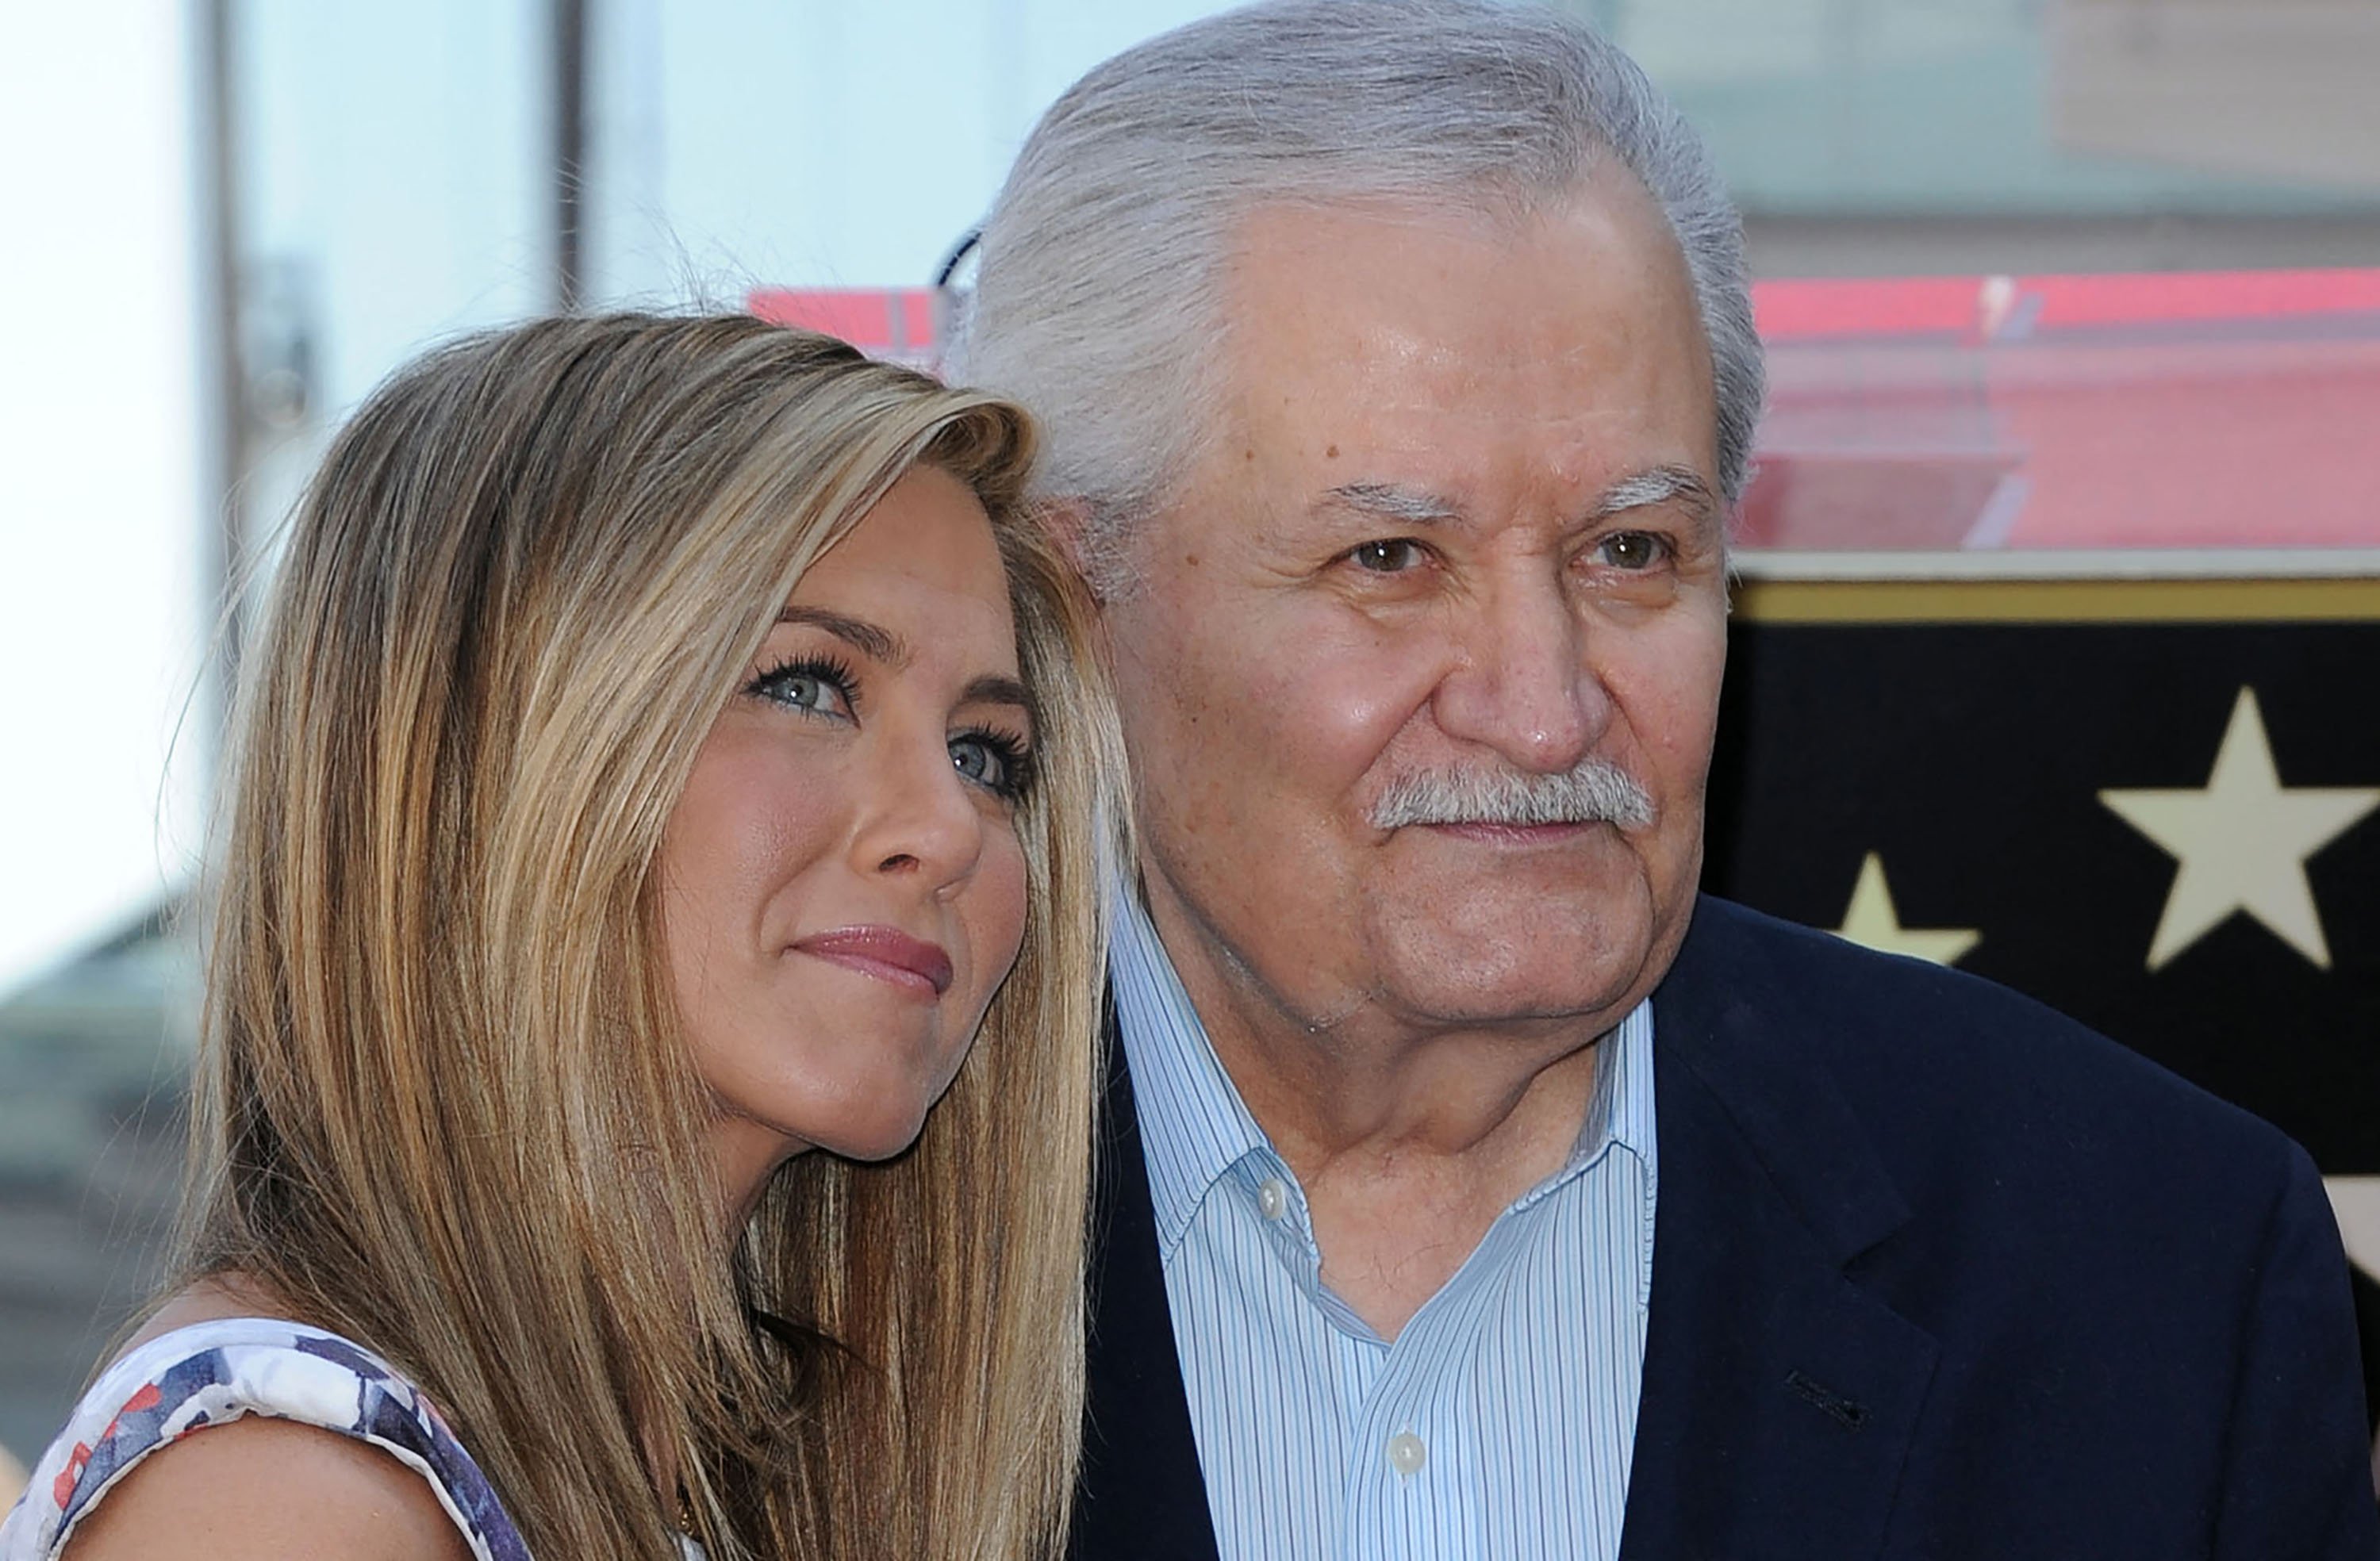 Jennifer and John Aniston during her Hollywood Walk of Fame star ceremony in Hollywood, California, on February 22, 2012 | Source: Getty Images